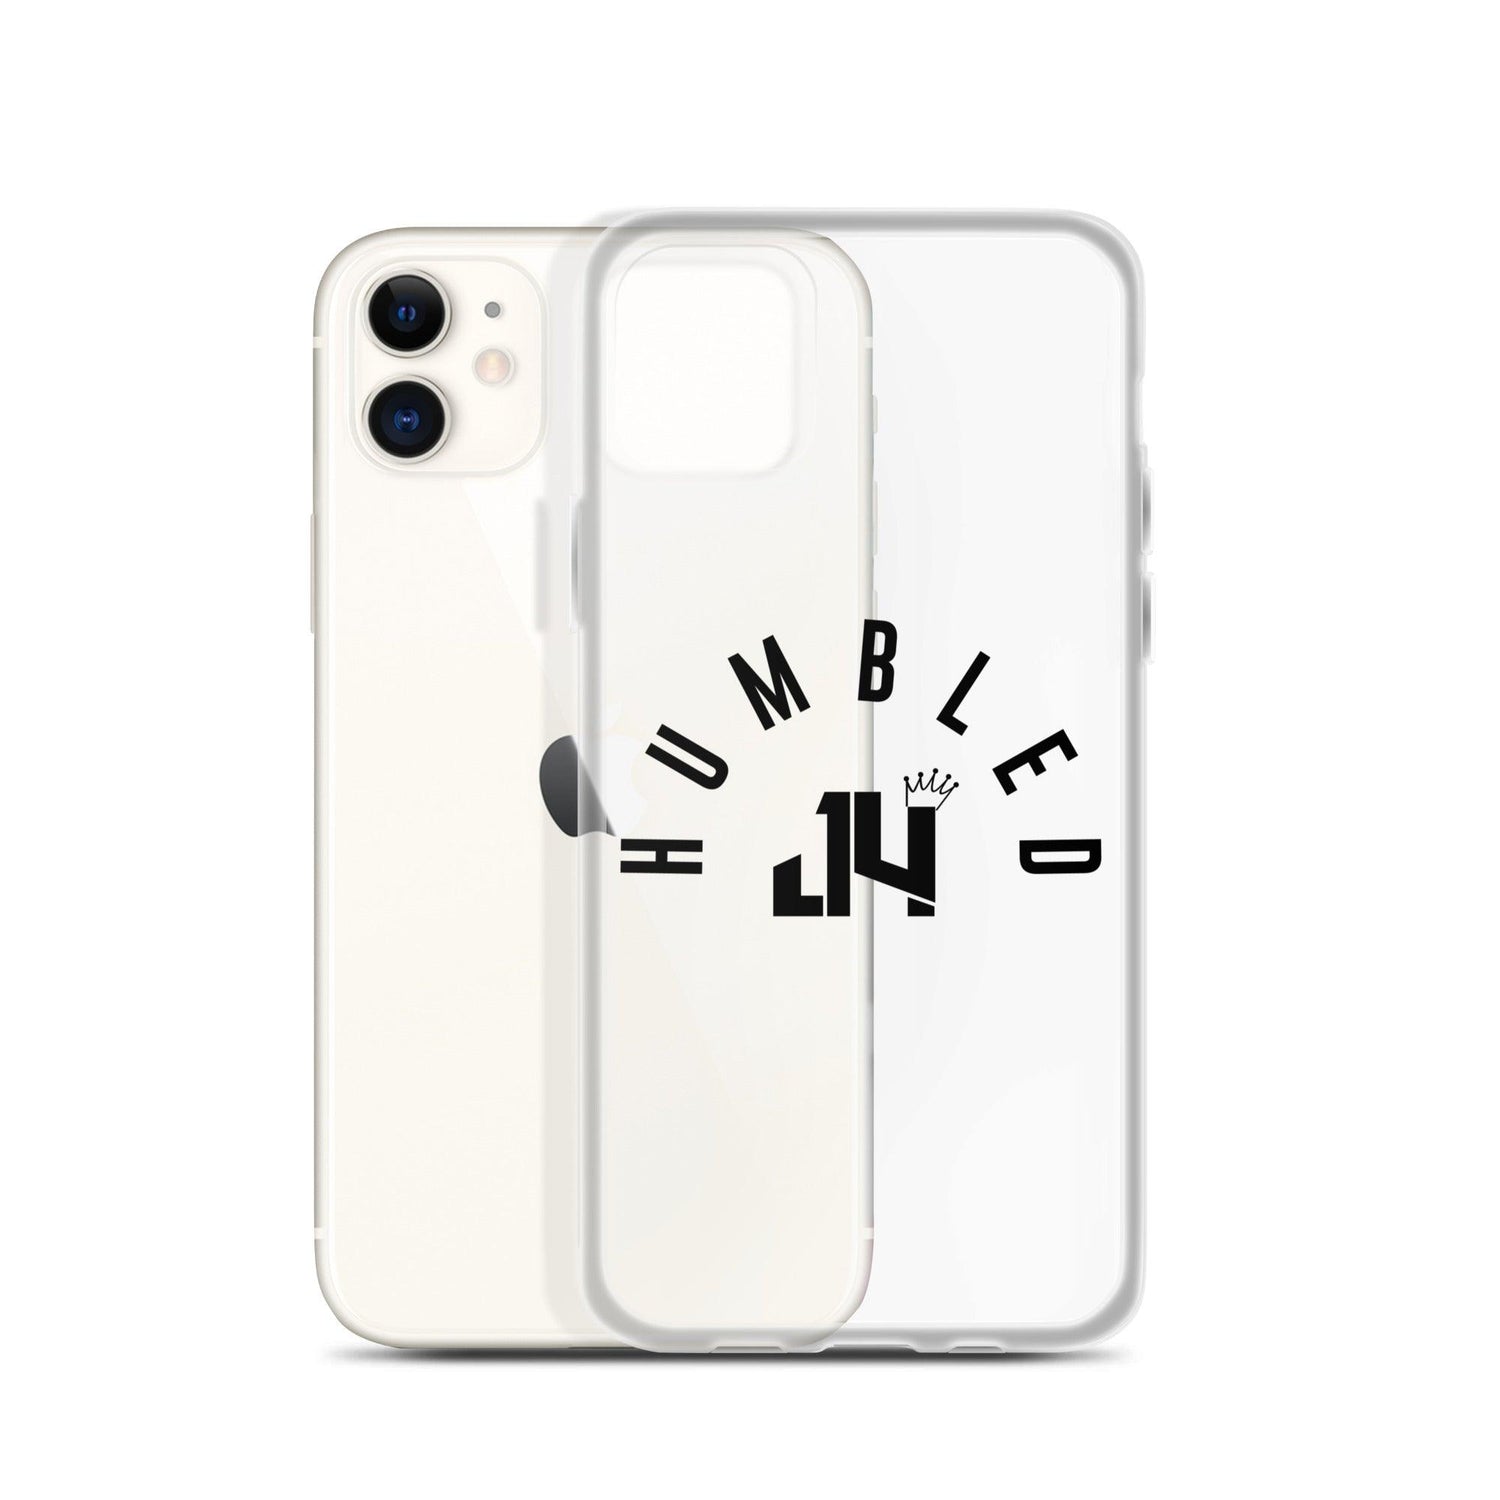 Jeff Foreman “Humbled” iPhone Case - Fan Arch